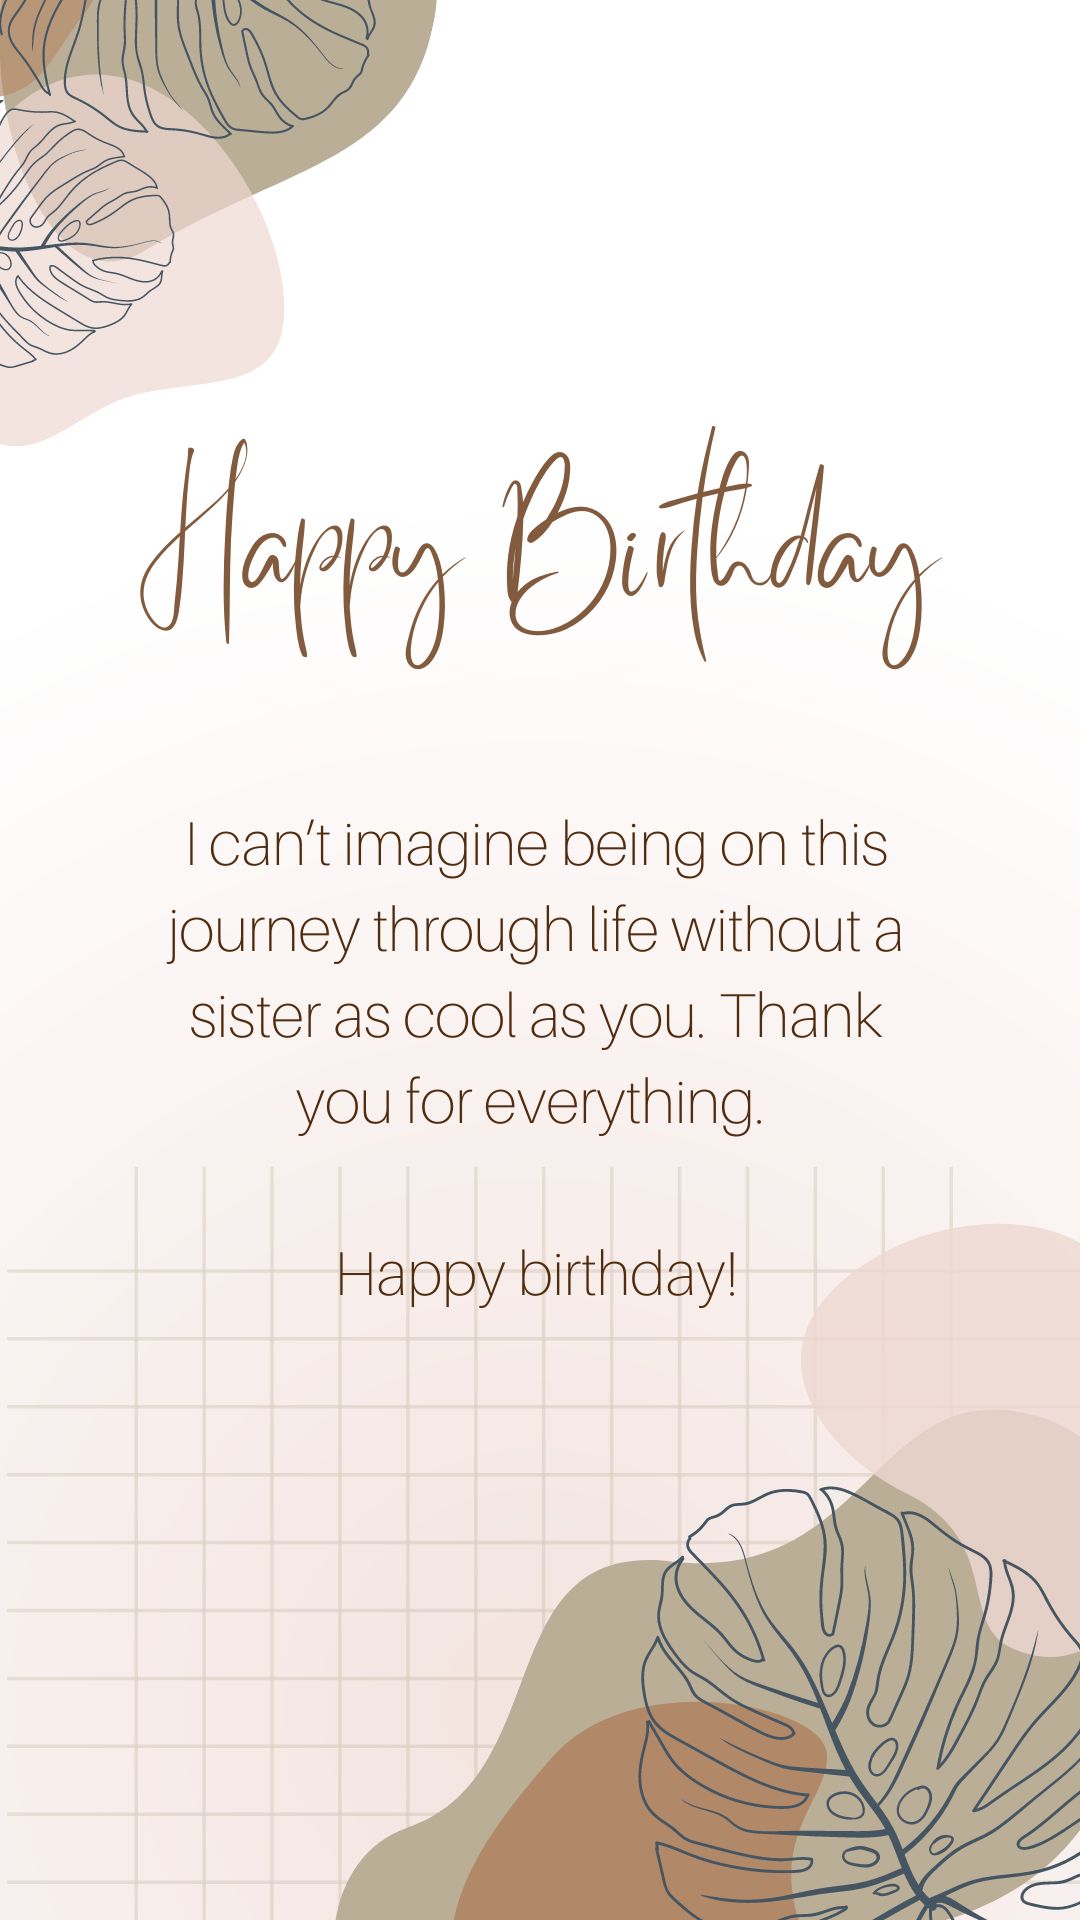 10+ Happy Birthday Images Sister - greetingspixel.com